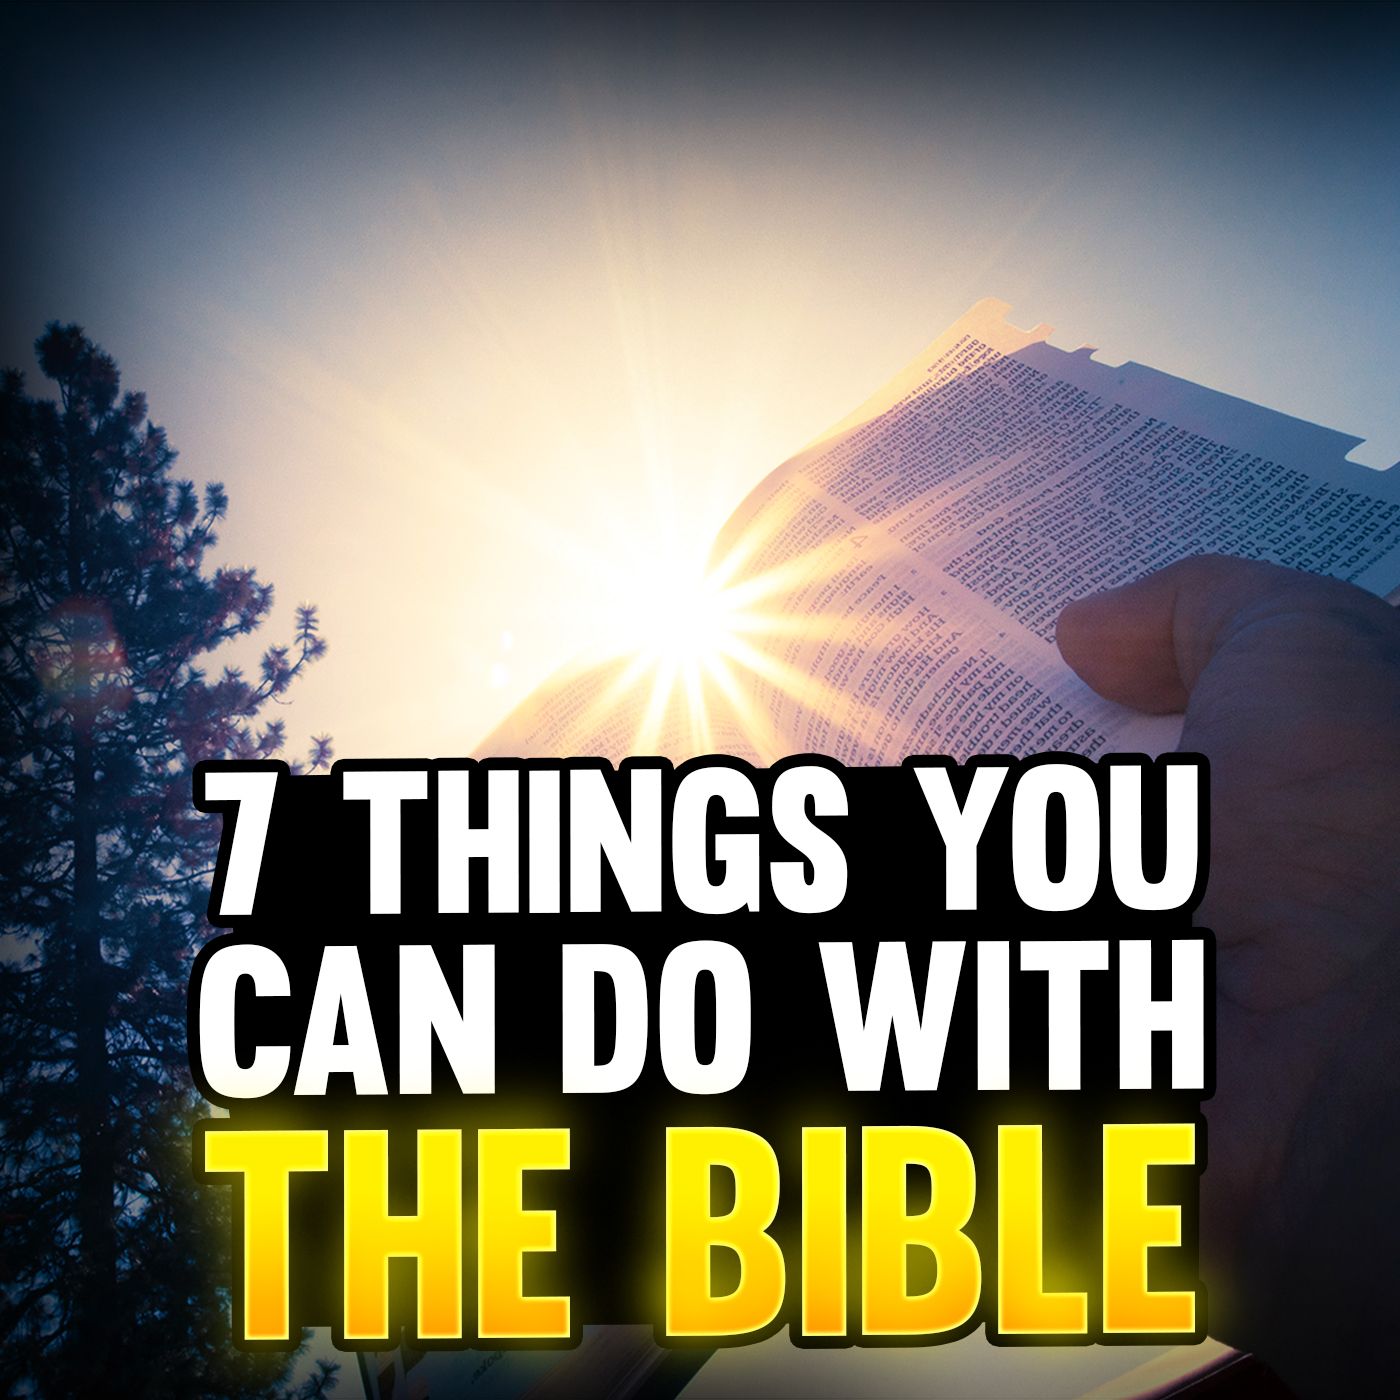 Episode 96 - 7 Things You Can Do With The Bible